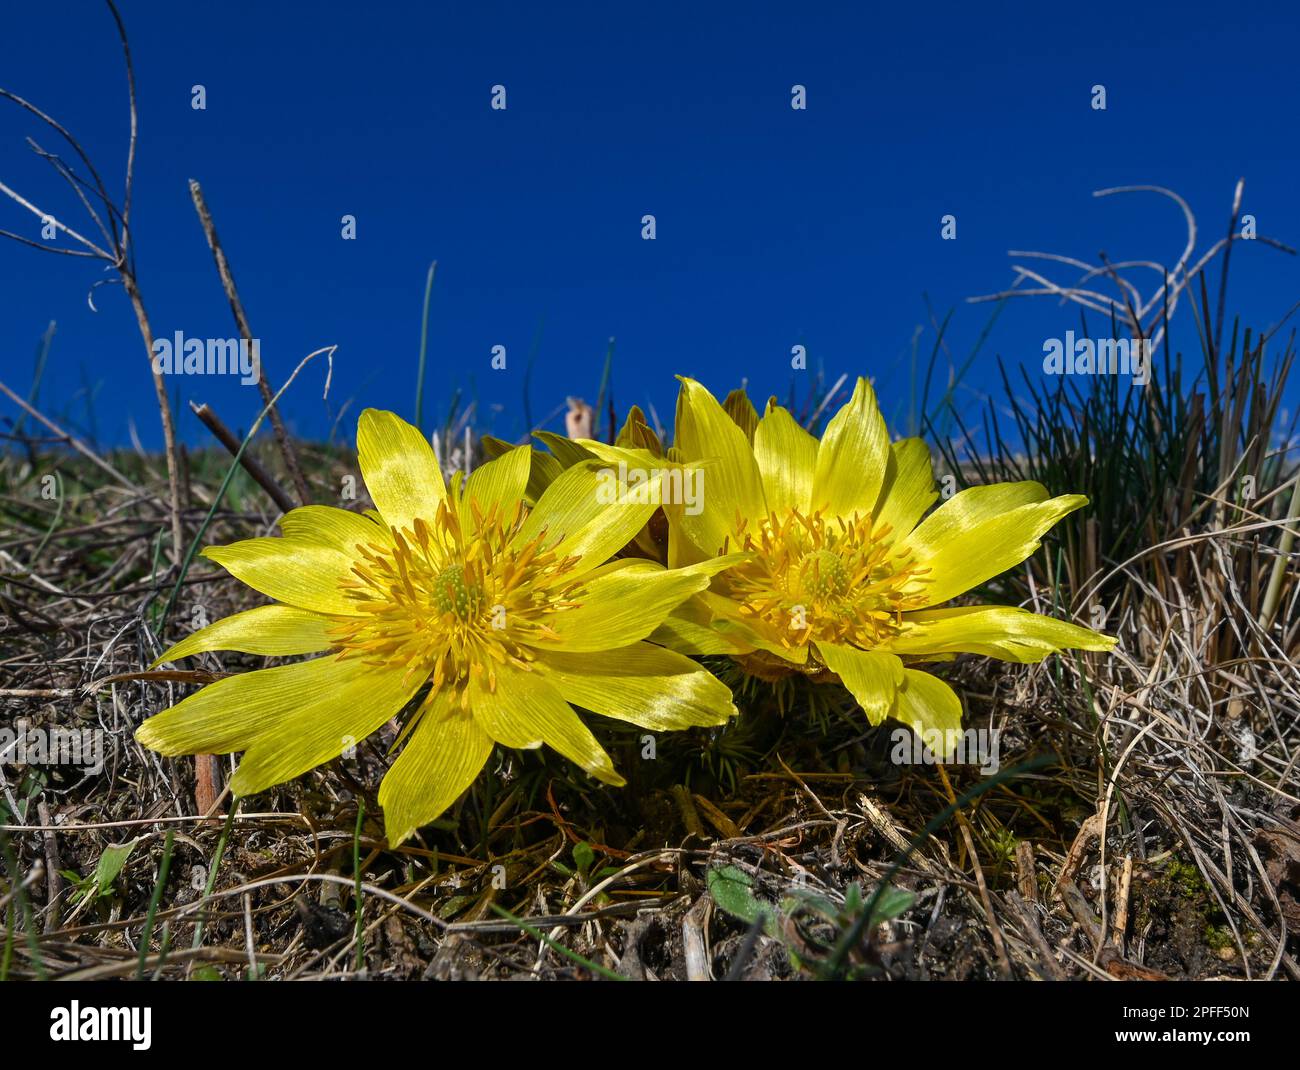 16 March 2023, Brandenburg, Lebus: Two Adonis florets bloom on the Oder slope in the district of Märkisch-Oderland. The mild temperatures and warm sunshine of the last few days have led to the first Adonis florets blooming. The area between Lebus on the Oder and Mallnow on the Oderbruch rim in East Brandenburg is one of the largest contiguous Adonis rose areas in Europe. In Brandenburg, these strictly protected species only occur on the Pontic slopes north of Frankfurt (Oder). For the poisonous flowers, the area was declared a Trockerasen nature reserve in 1984. Photo: Patrick Pleul/dpa Stock Photo